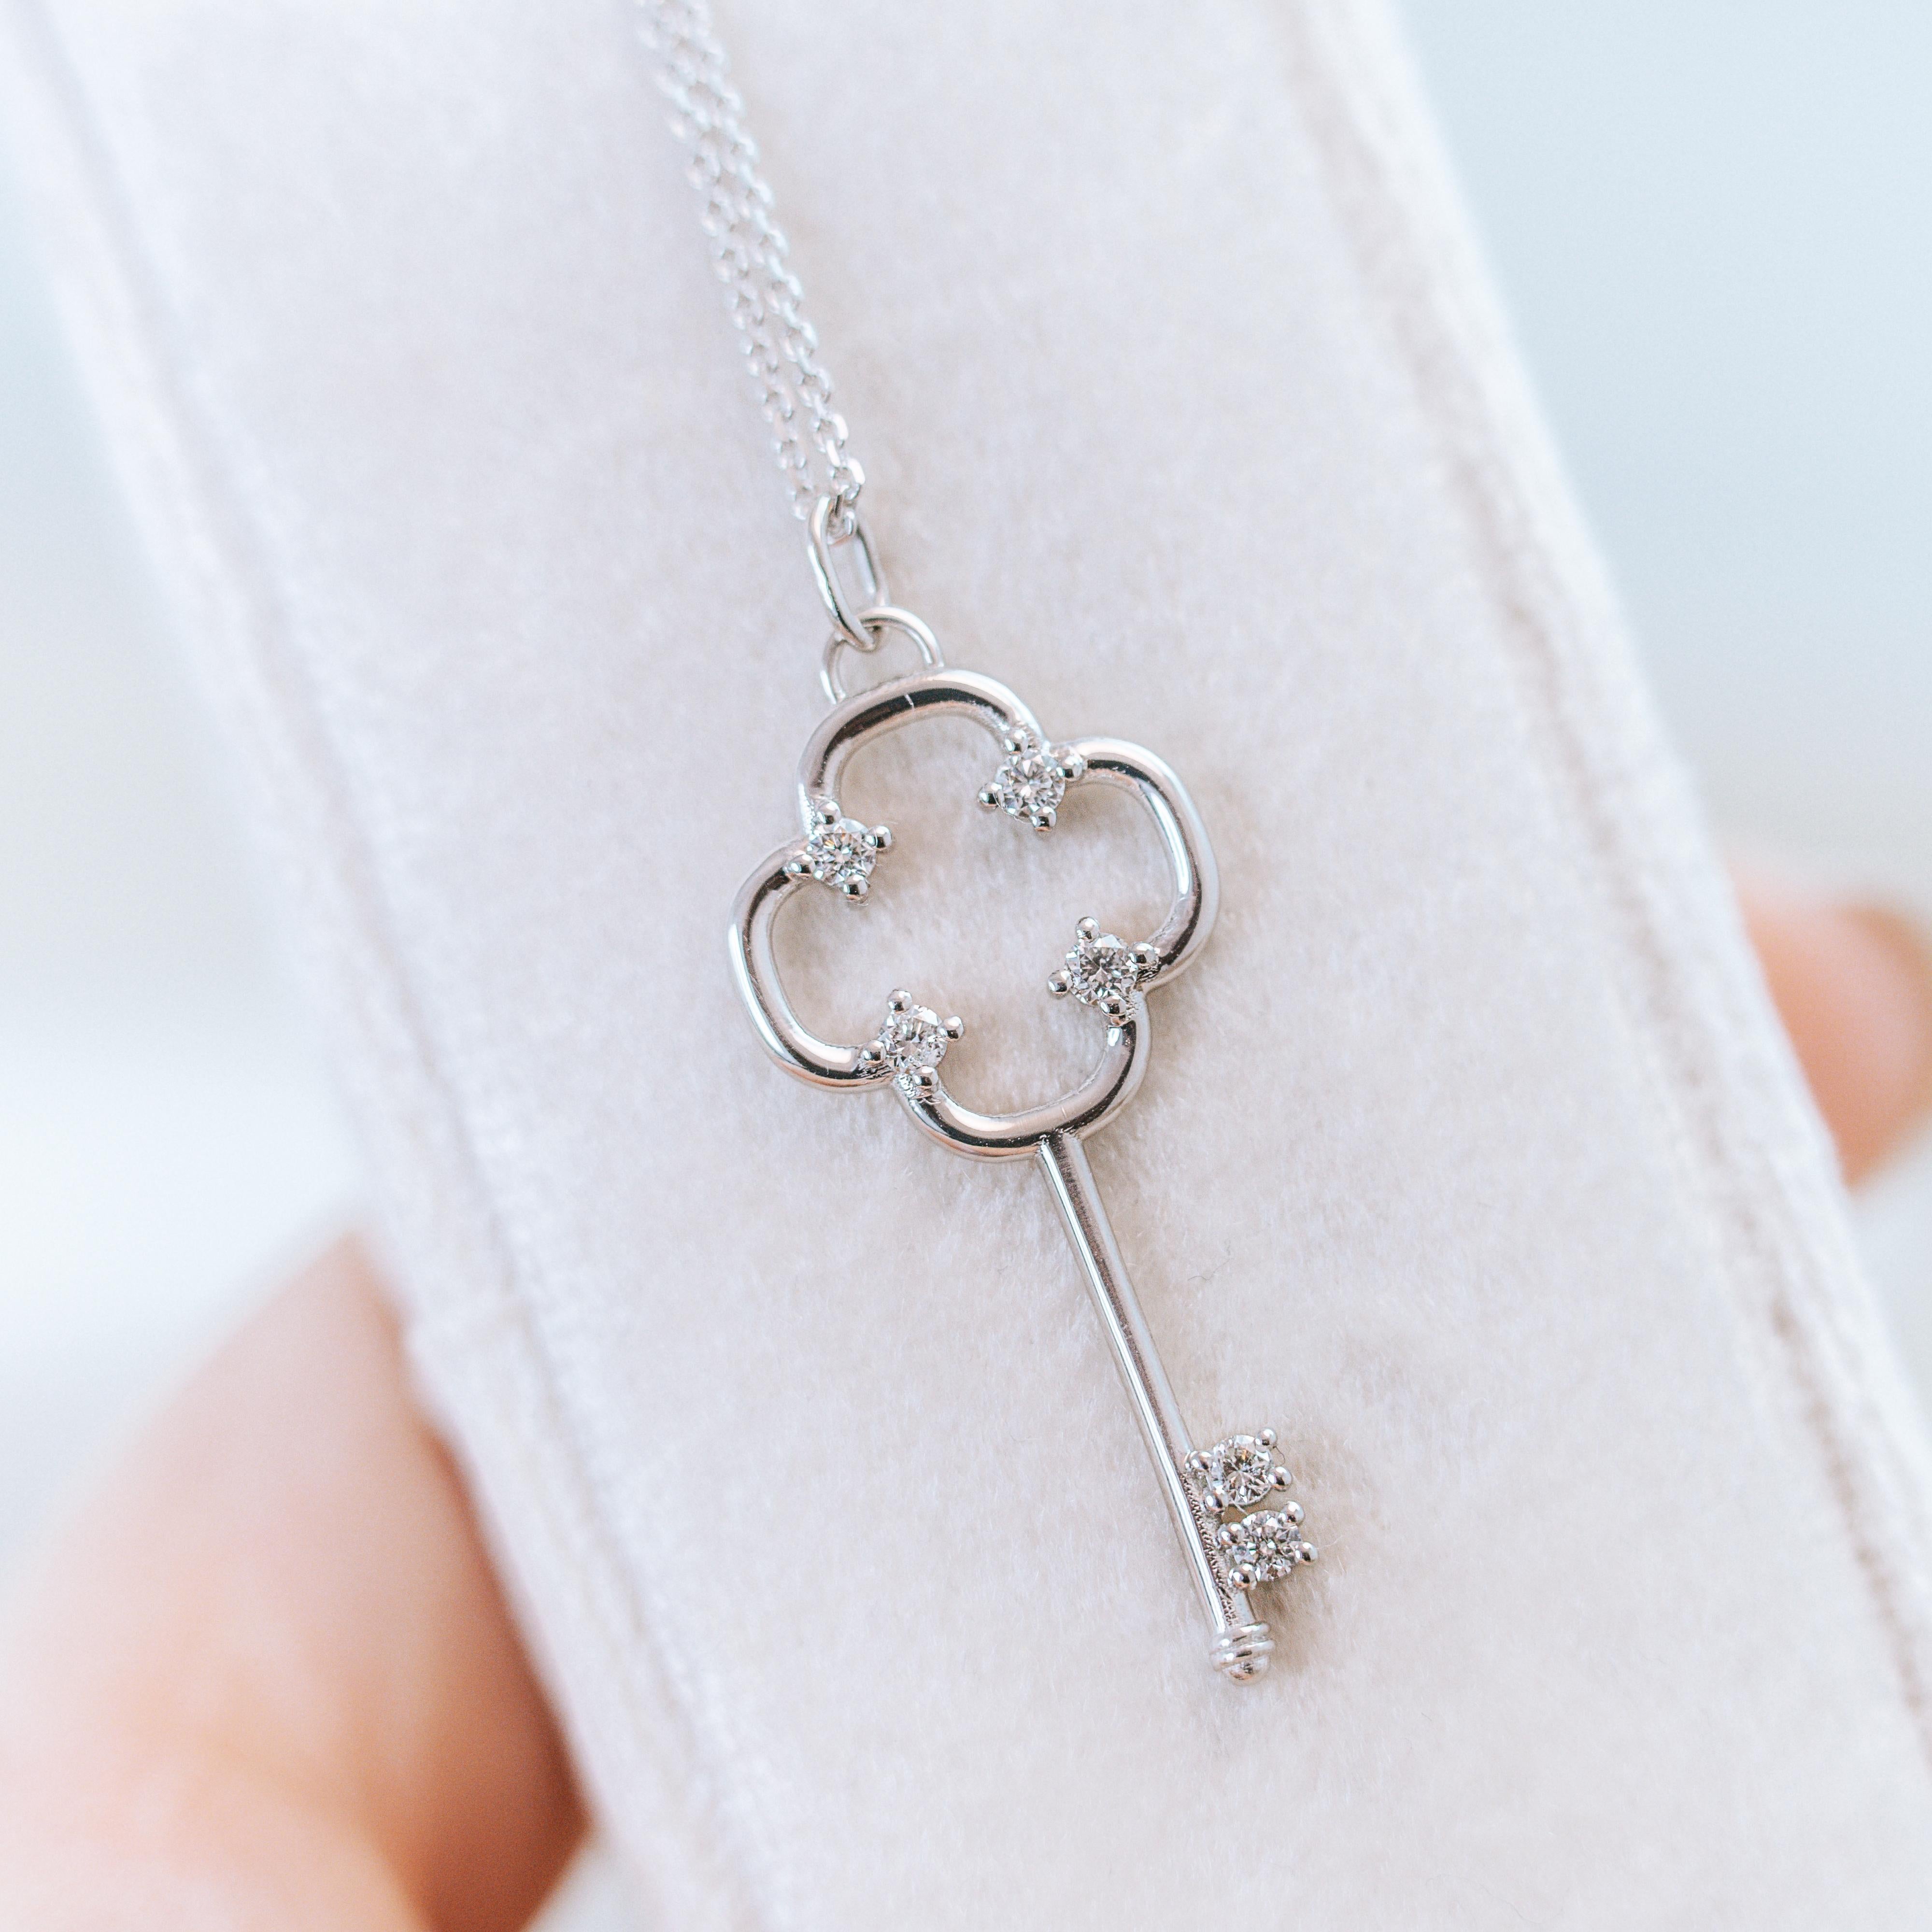 Key necklace with diamonds in white gold 14k.
0.37 ct total weight of diamonds.
Dimensions of the key 3 cm x 1.4 cm.
Comes with 18'' chain (can be personalized).
Don't hesitate to contact us for details and personalization with other gemstones,